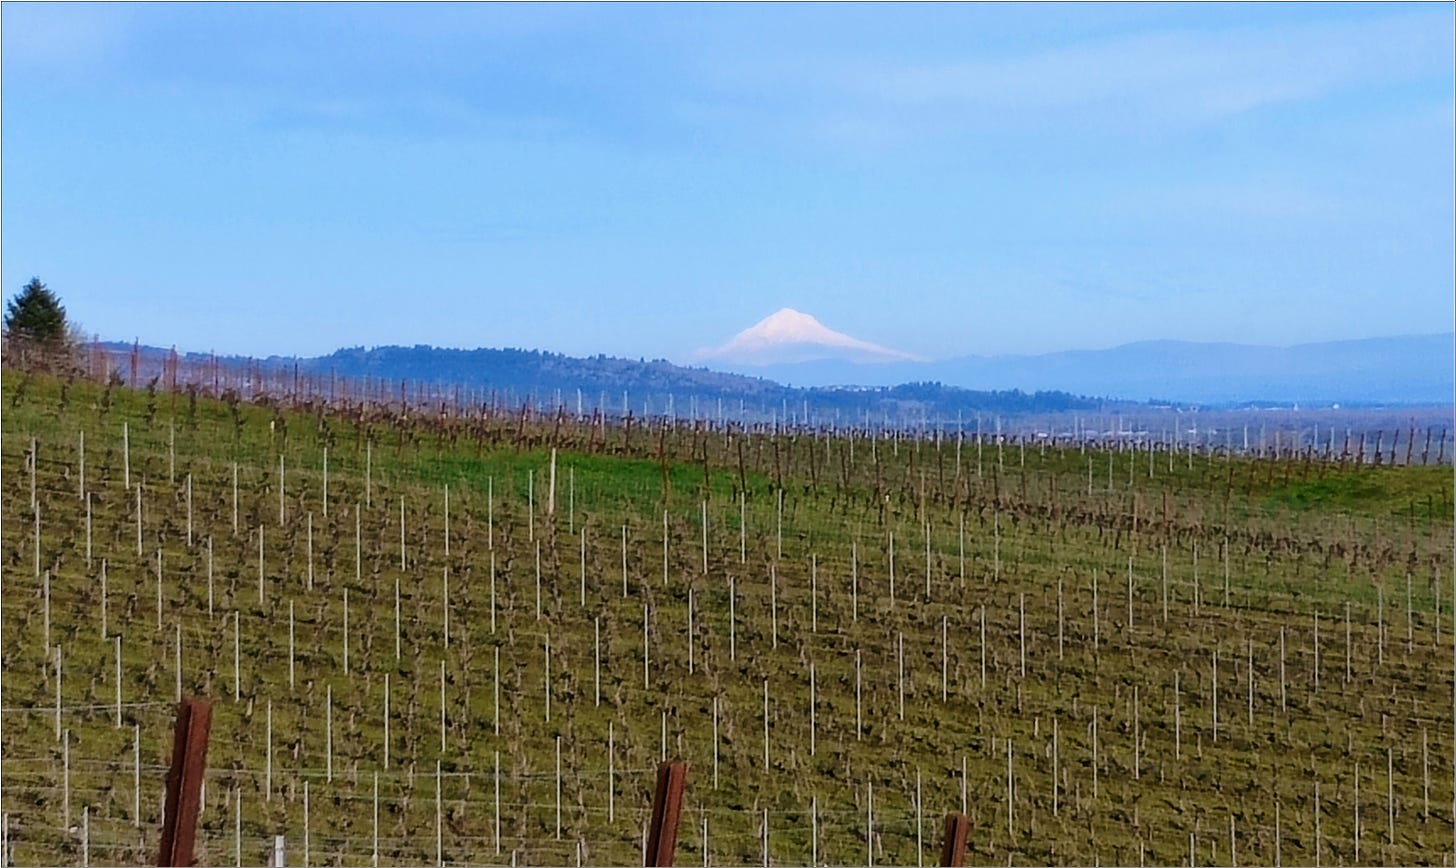 Mt. Jefferson on a beautiful Willamette Valley pre-spring day, but then...